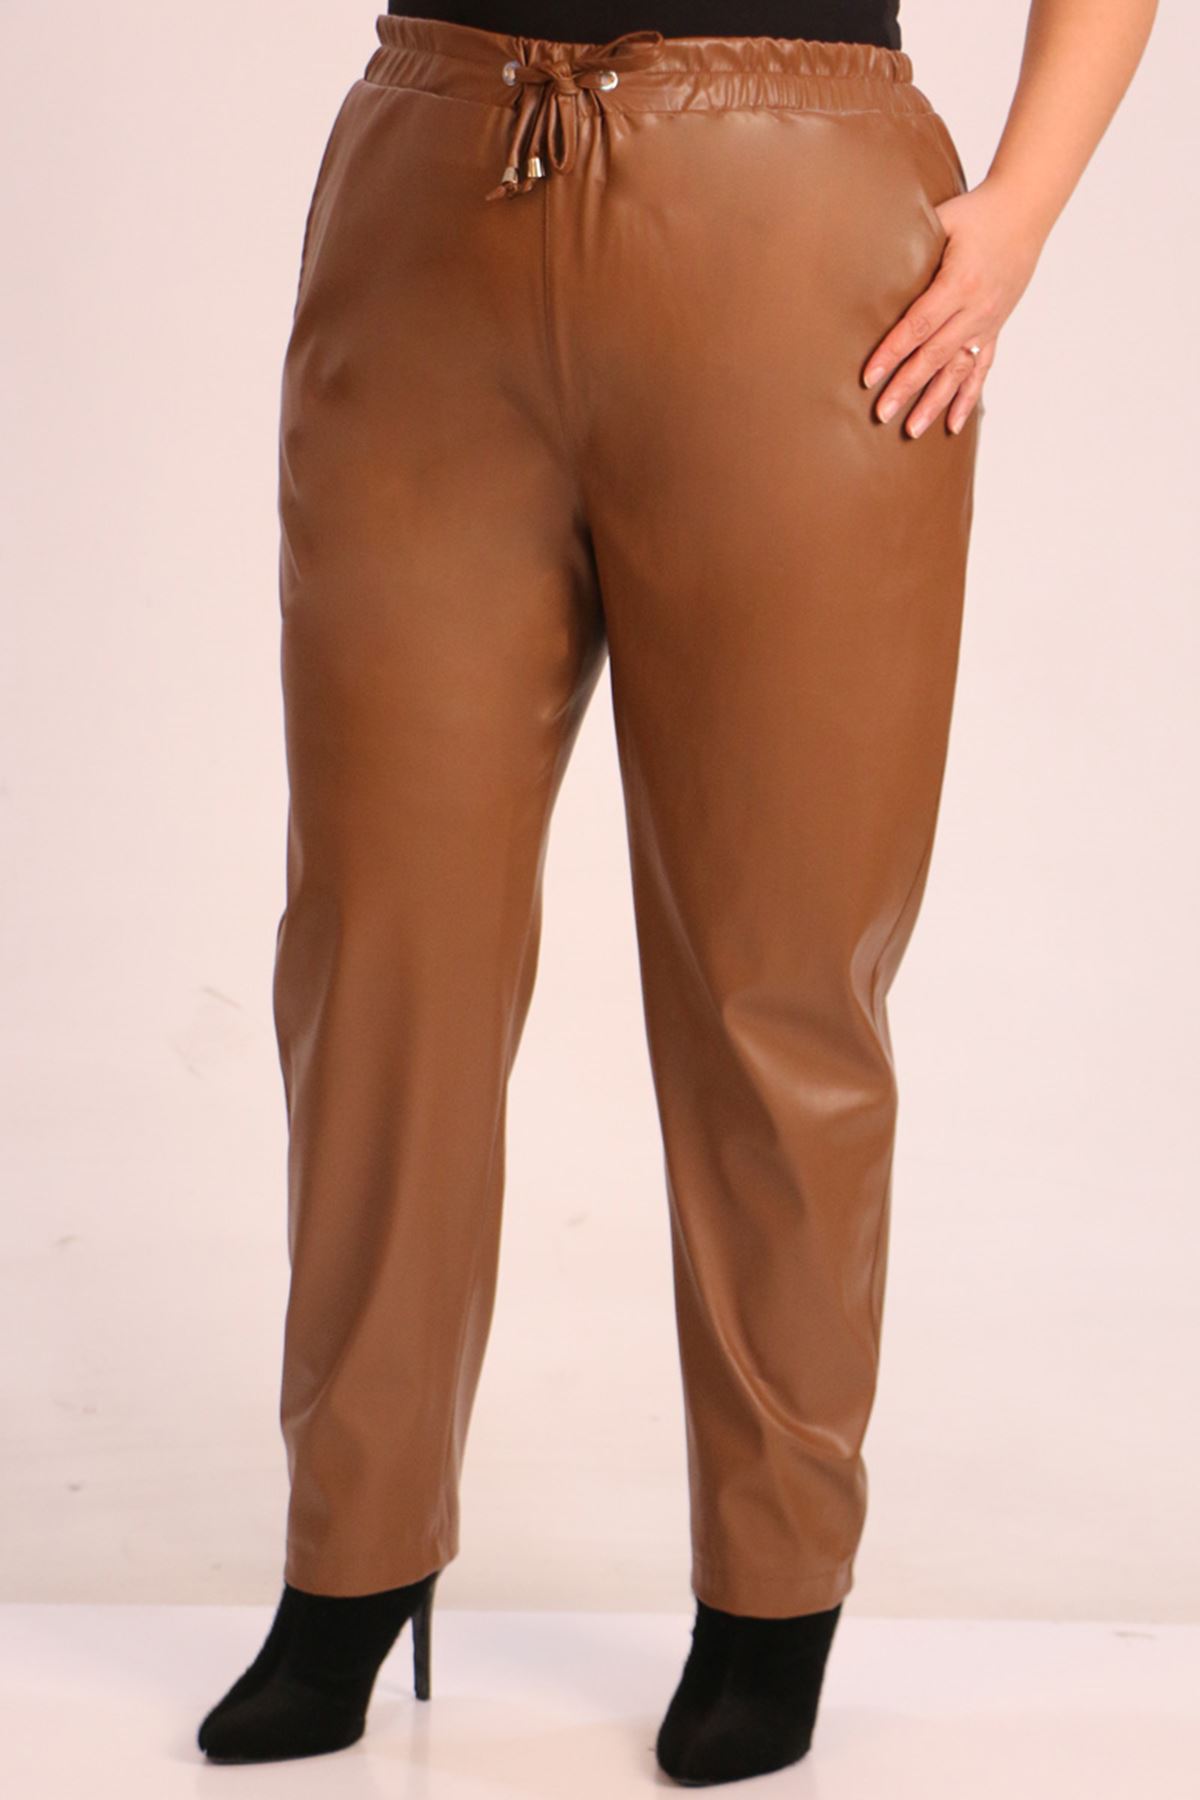 39039 Large Size Leather Trousers with Elastic Waist - Dark Mink